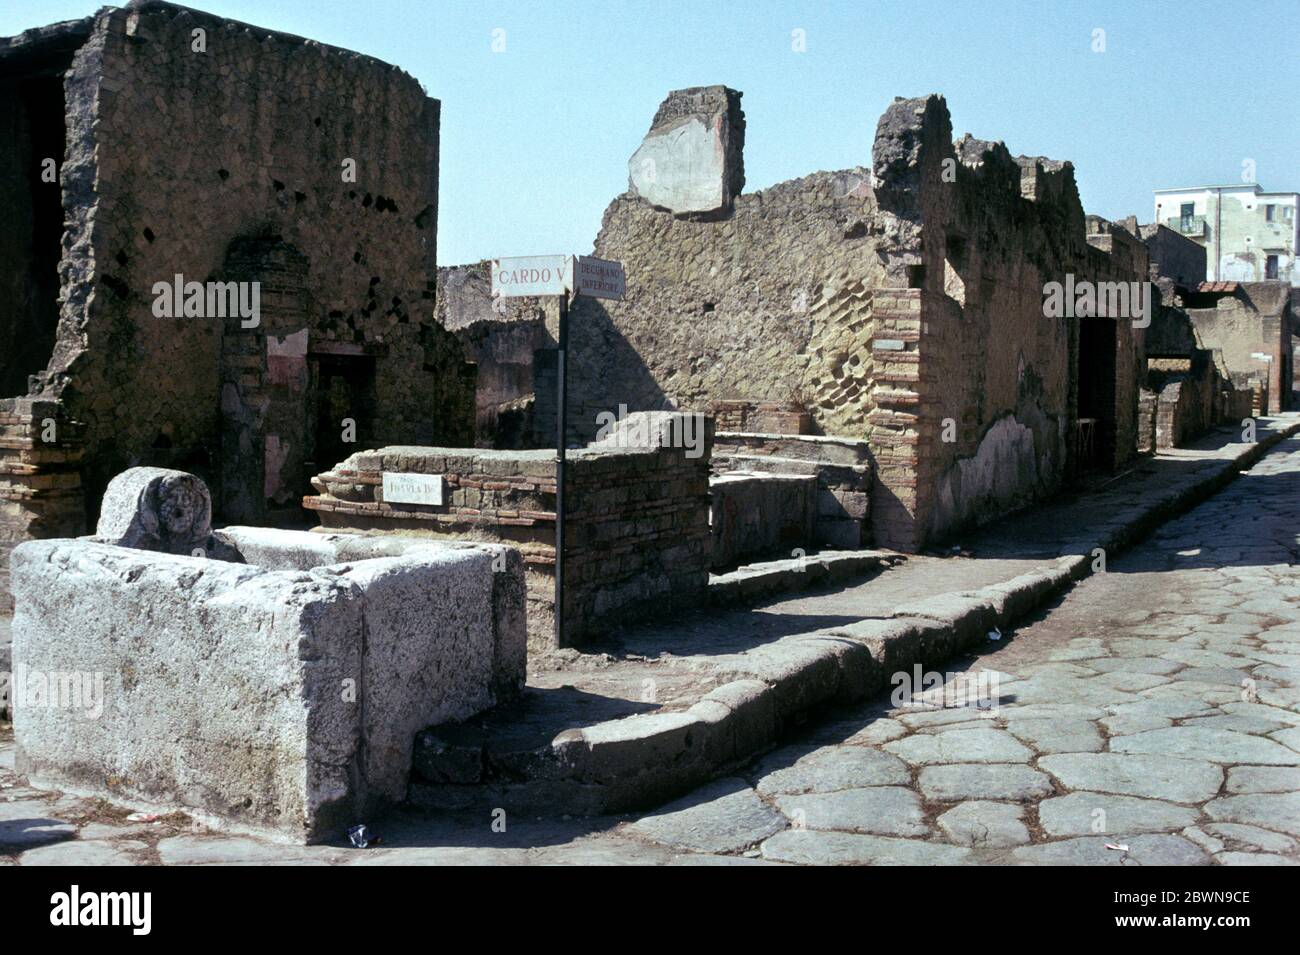 Cardo V street in the ancient city of Herculaneum which was buried under volcanic ash during the eruption of Mount Vesuvius in AD79, Ercolano, Campania, Italy Stock Photo